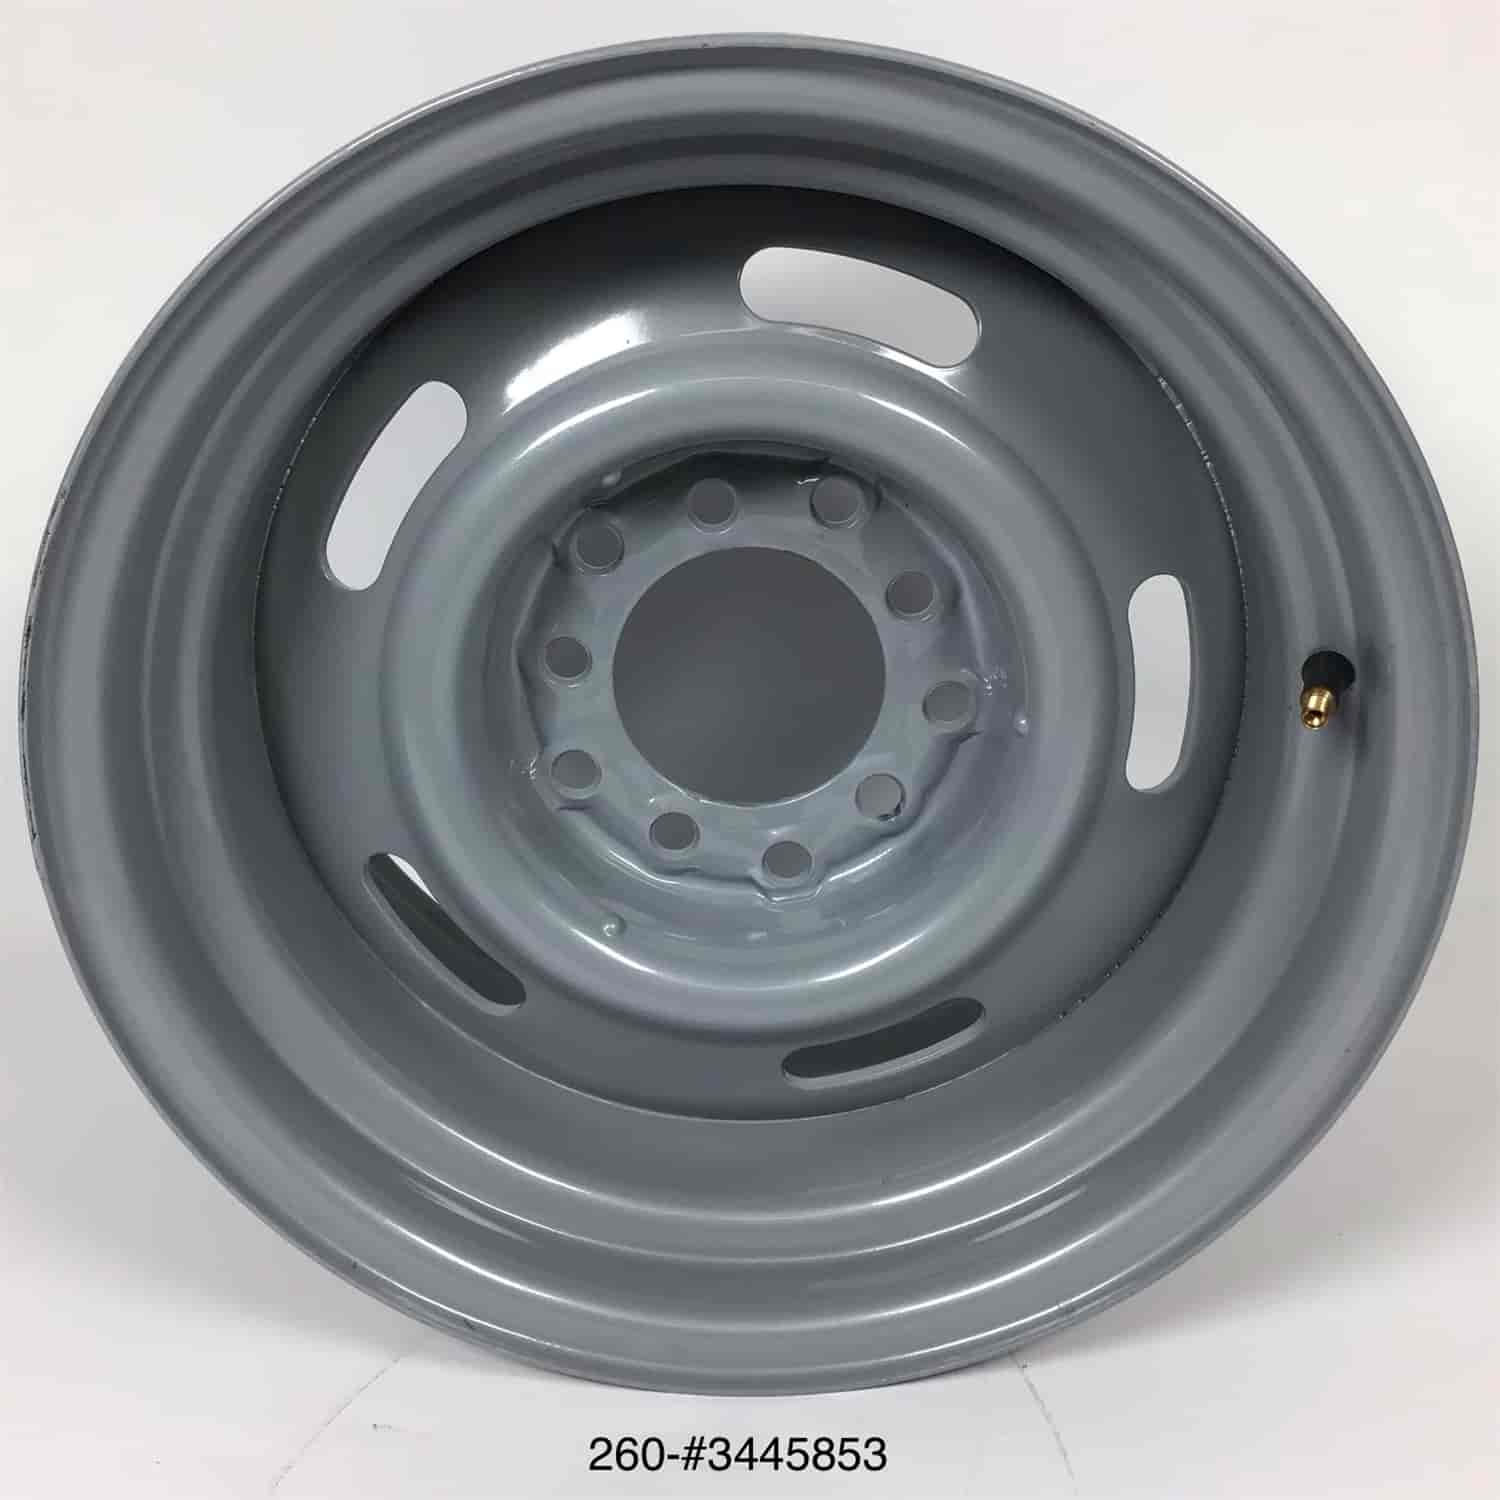 *BLEMISHED* 344 Series Rally Wheel Size: 15